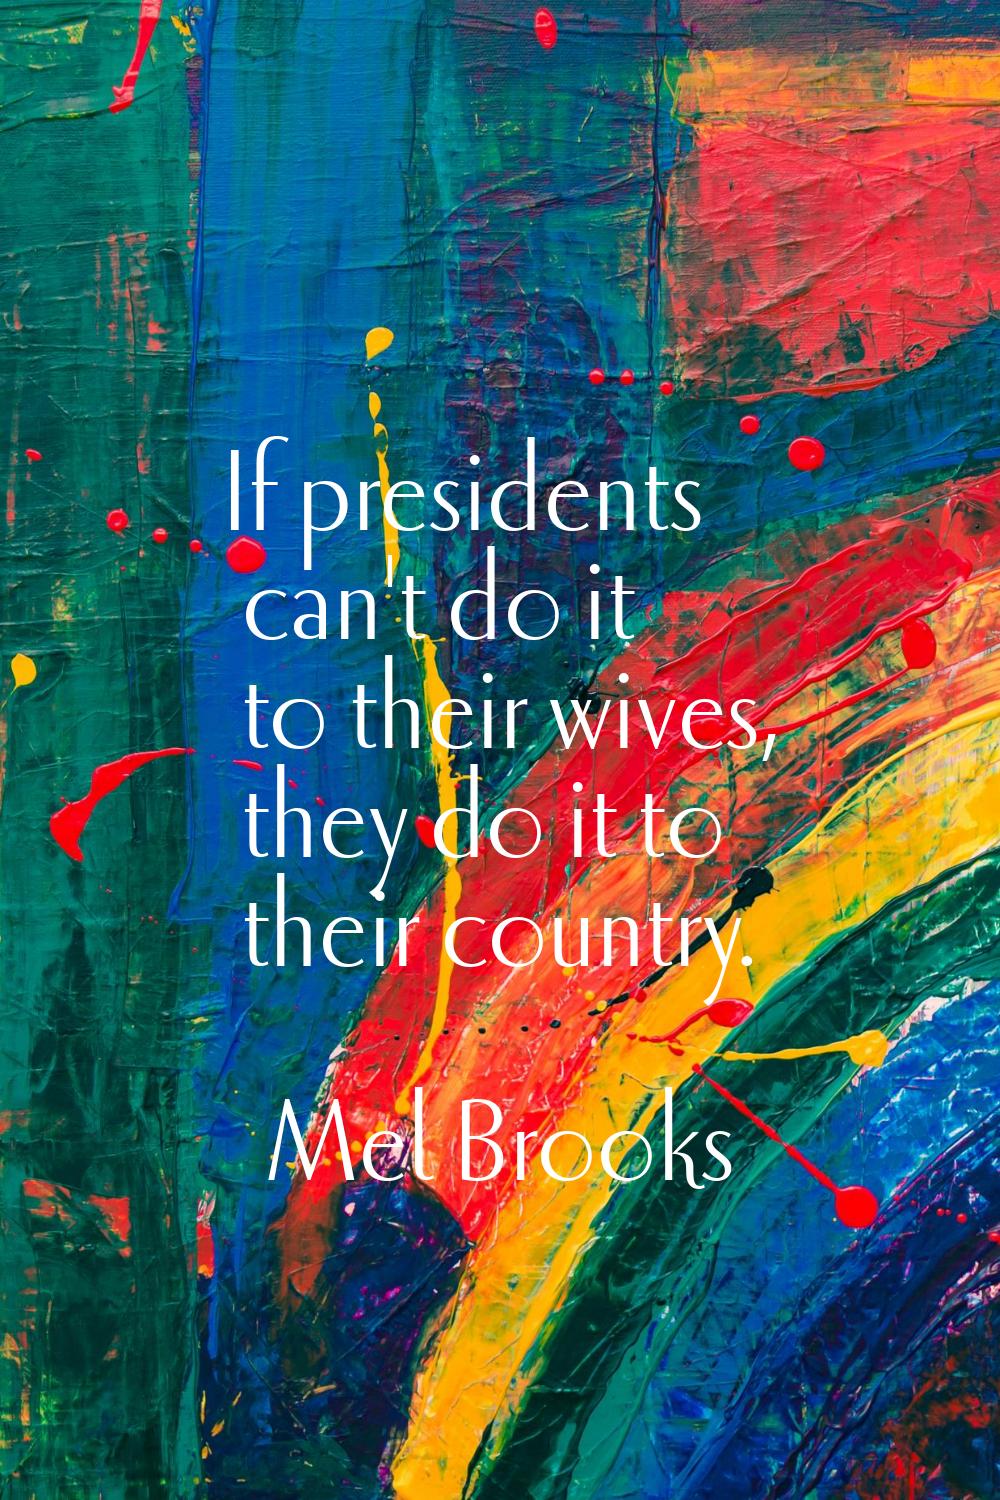 If presidents can't do it to their wives, they do it to their country.